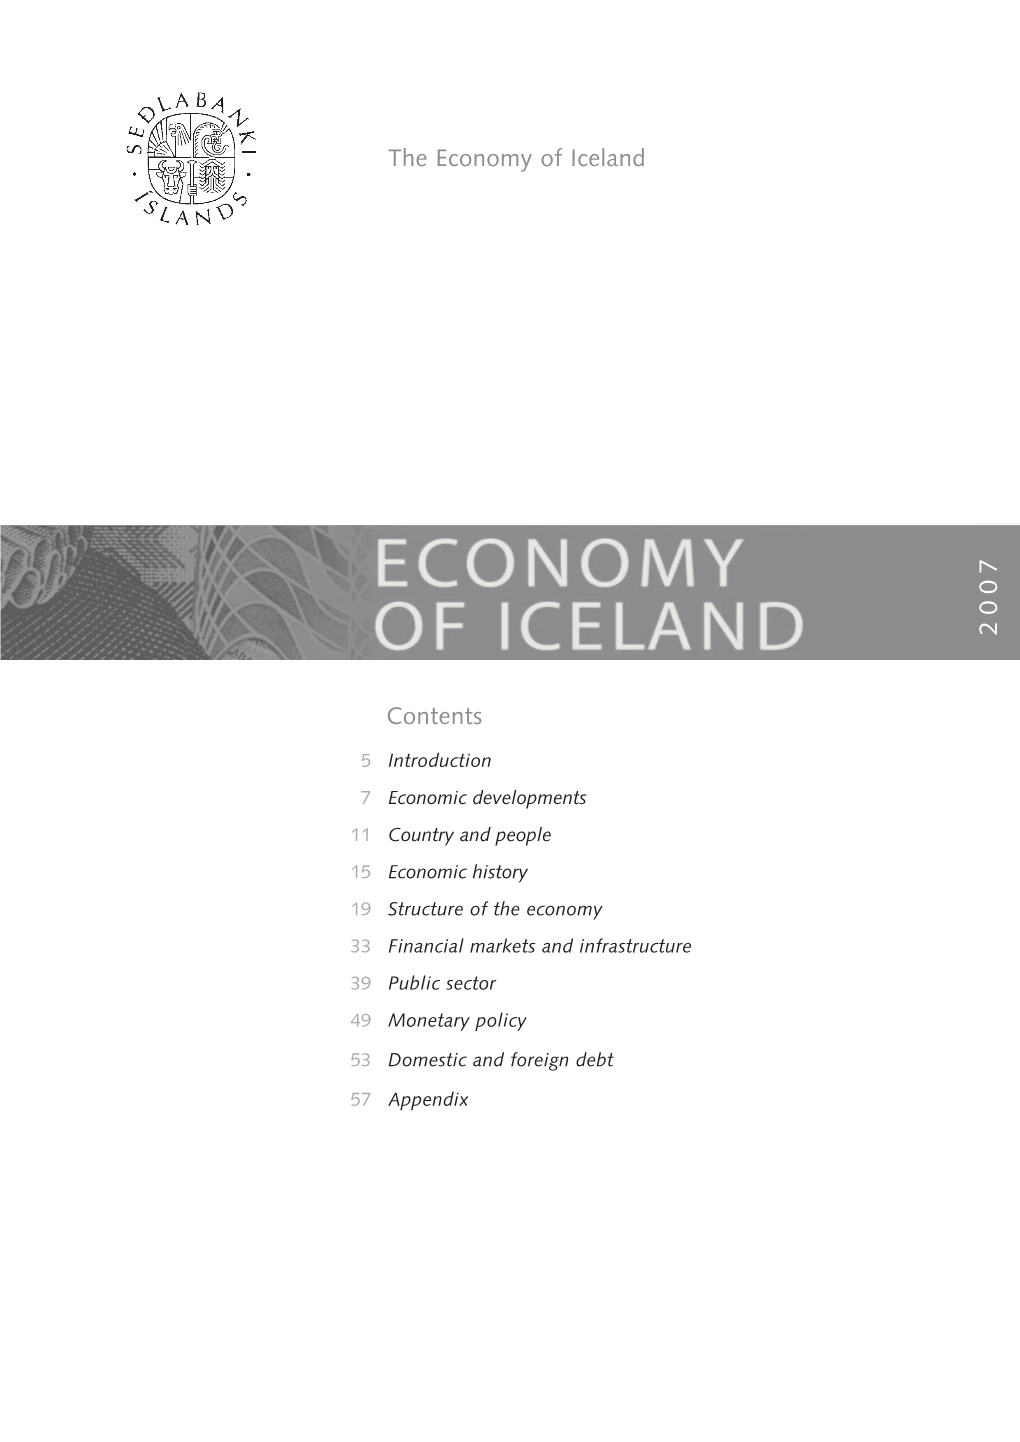 ECONOMY of ICELAND 2007 January 1998 - August 2007 2005-2006, When the Surplus Reached 5% of GDP